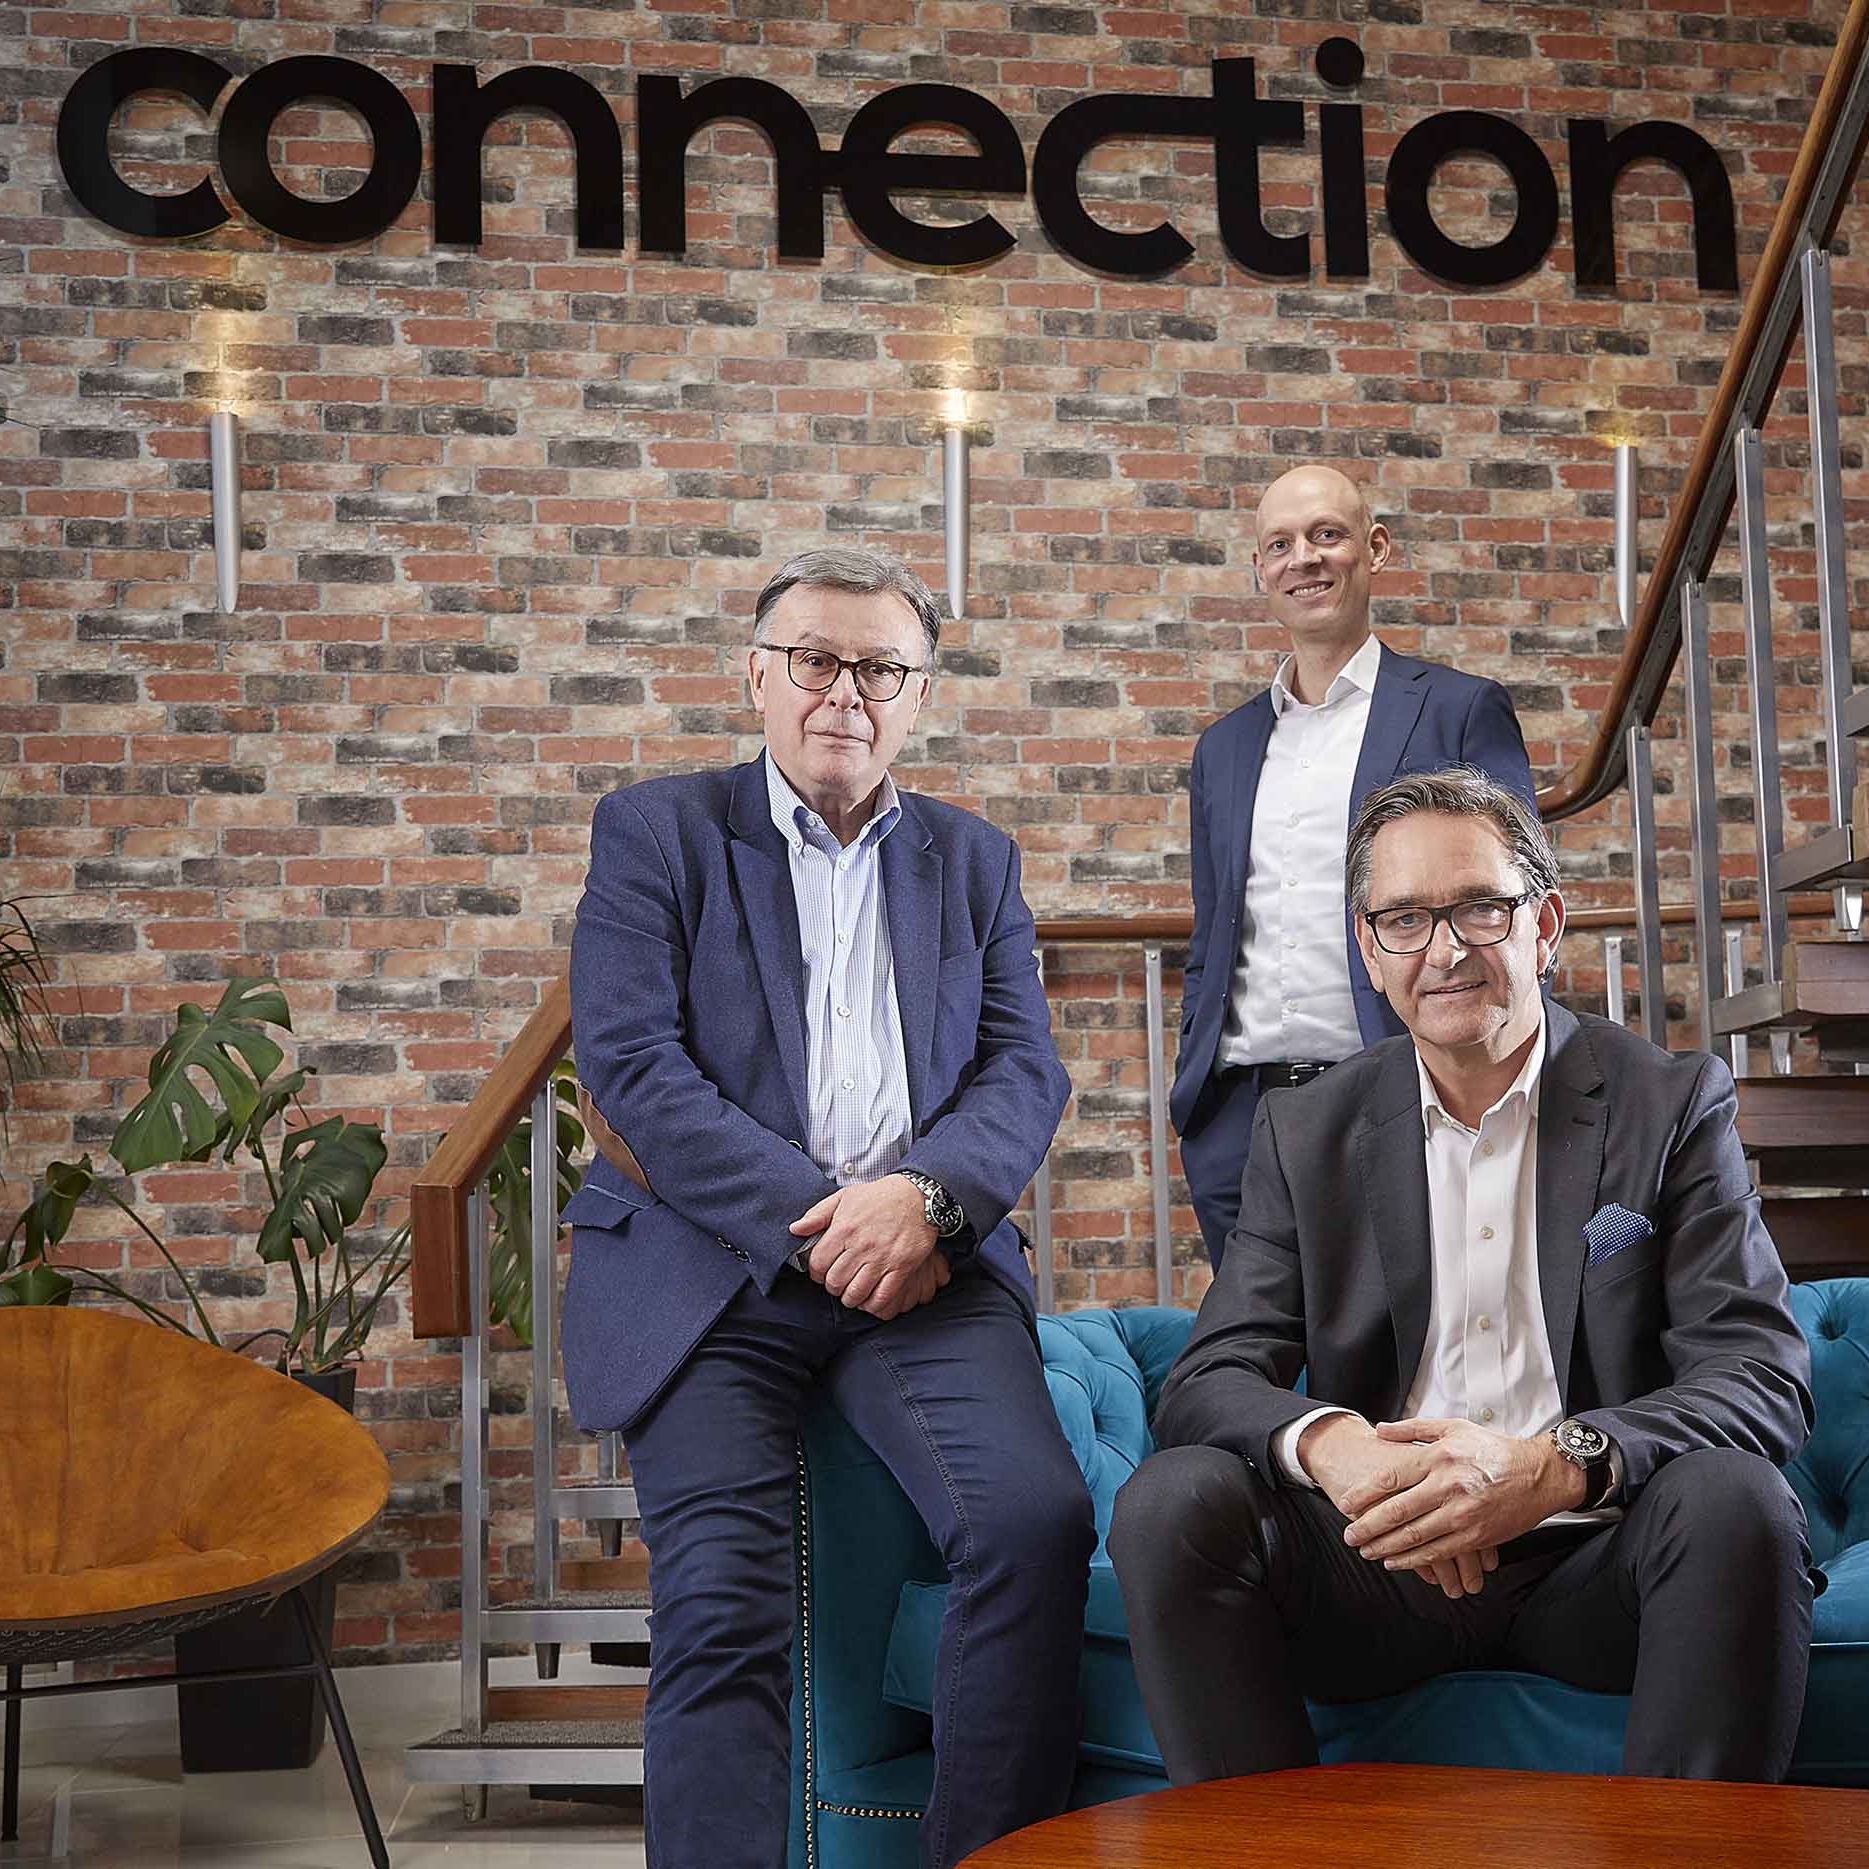 Office furniture giant Flokk acquires Connection, doubling footprint in UK